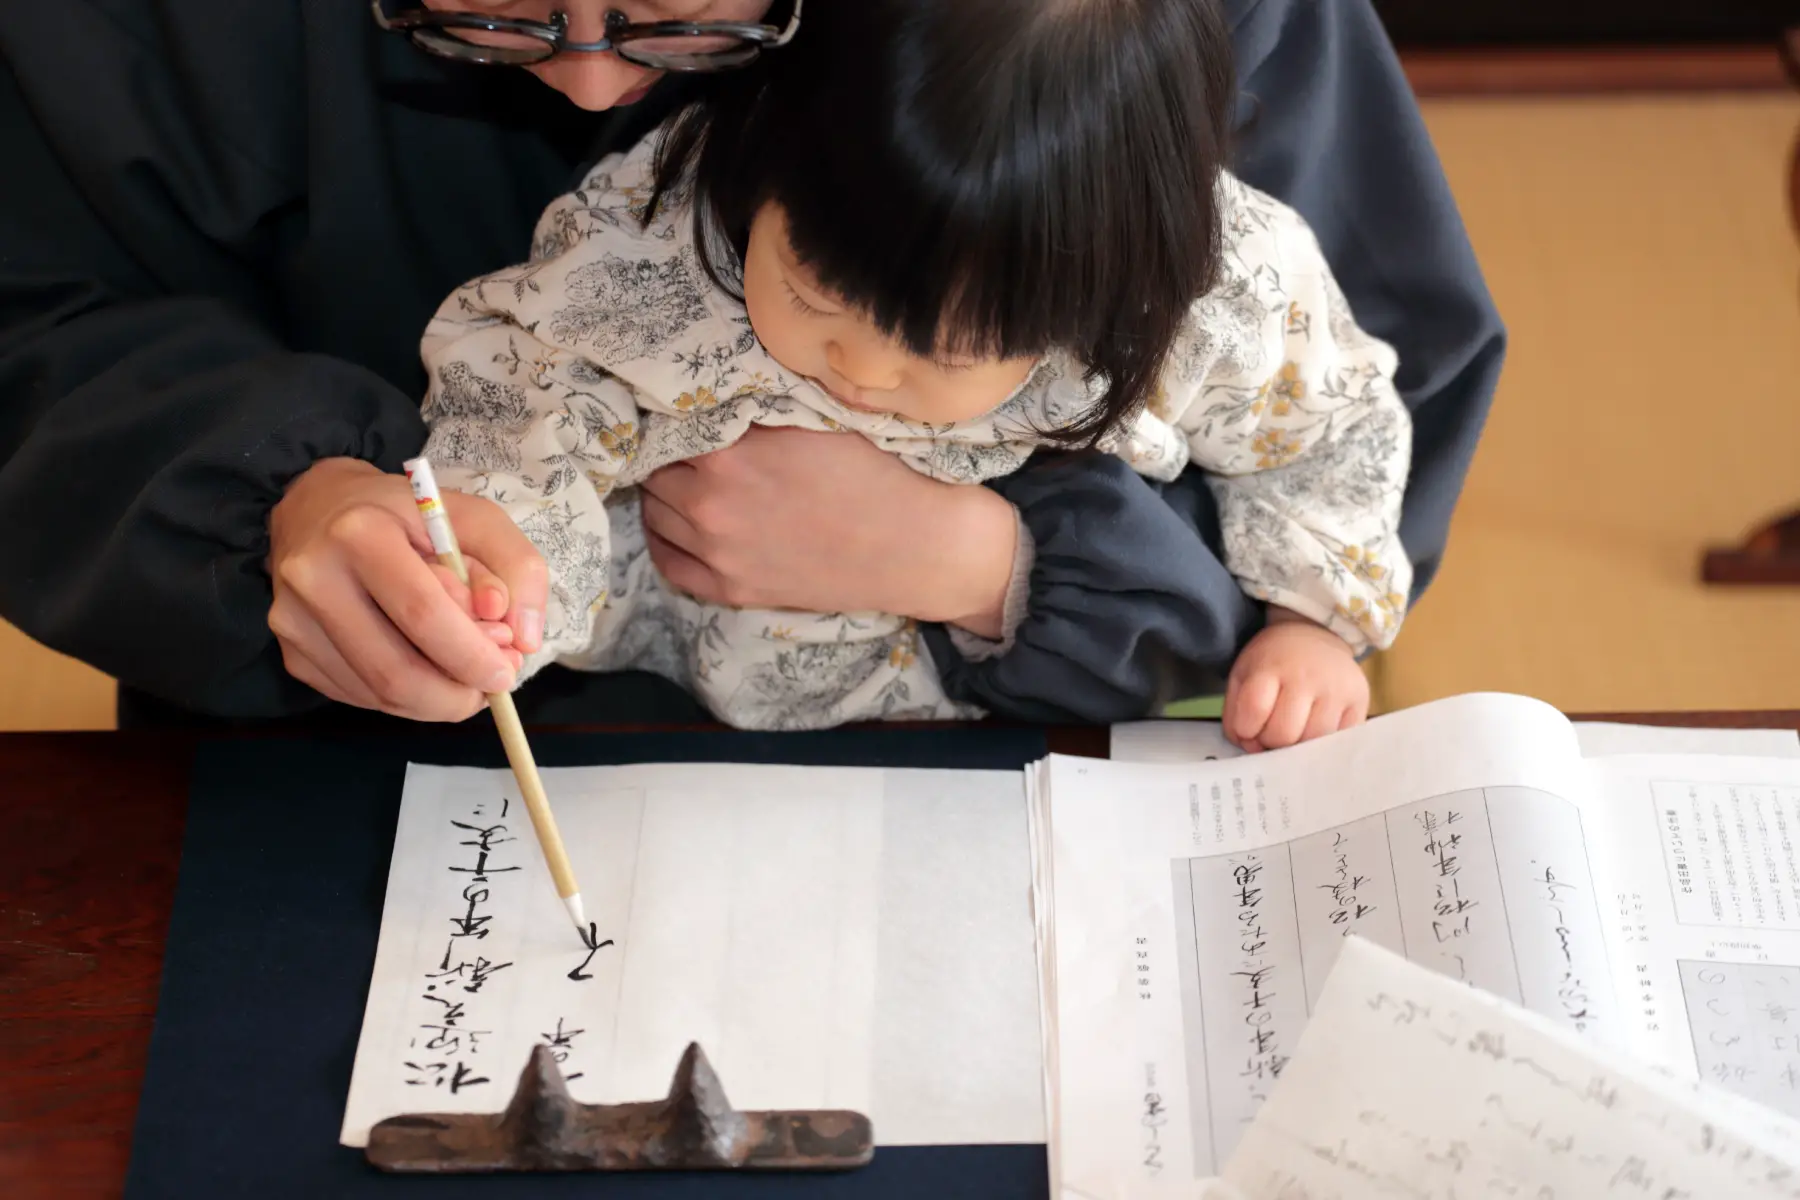 Father holds child and guides their hand to write kanji characters